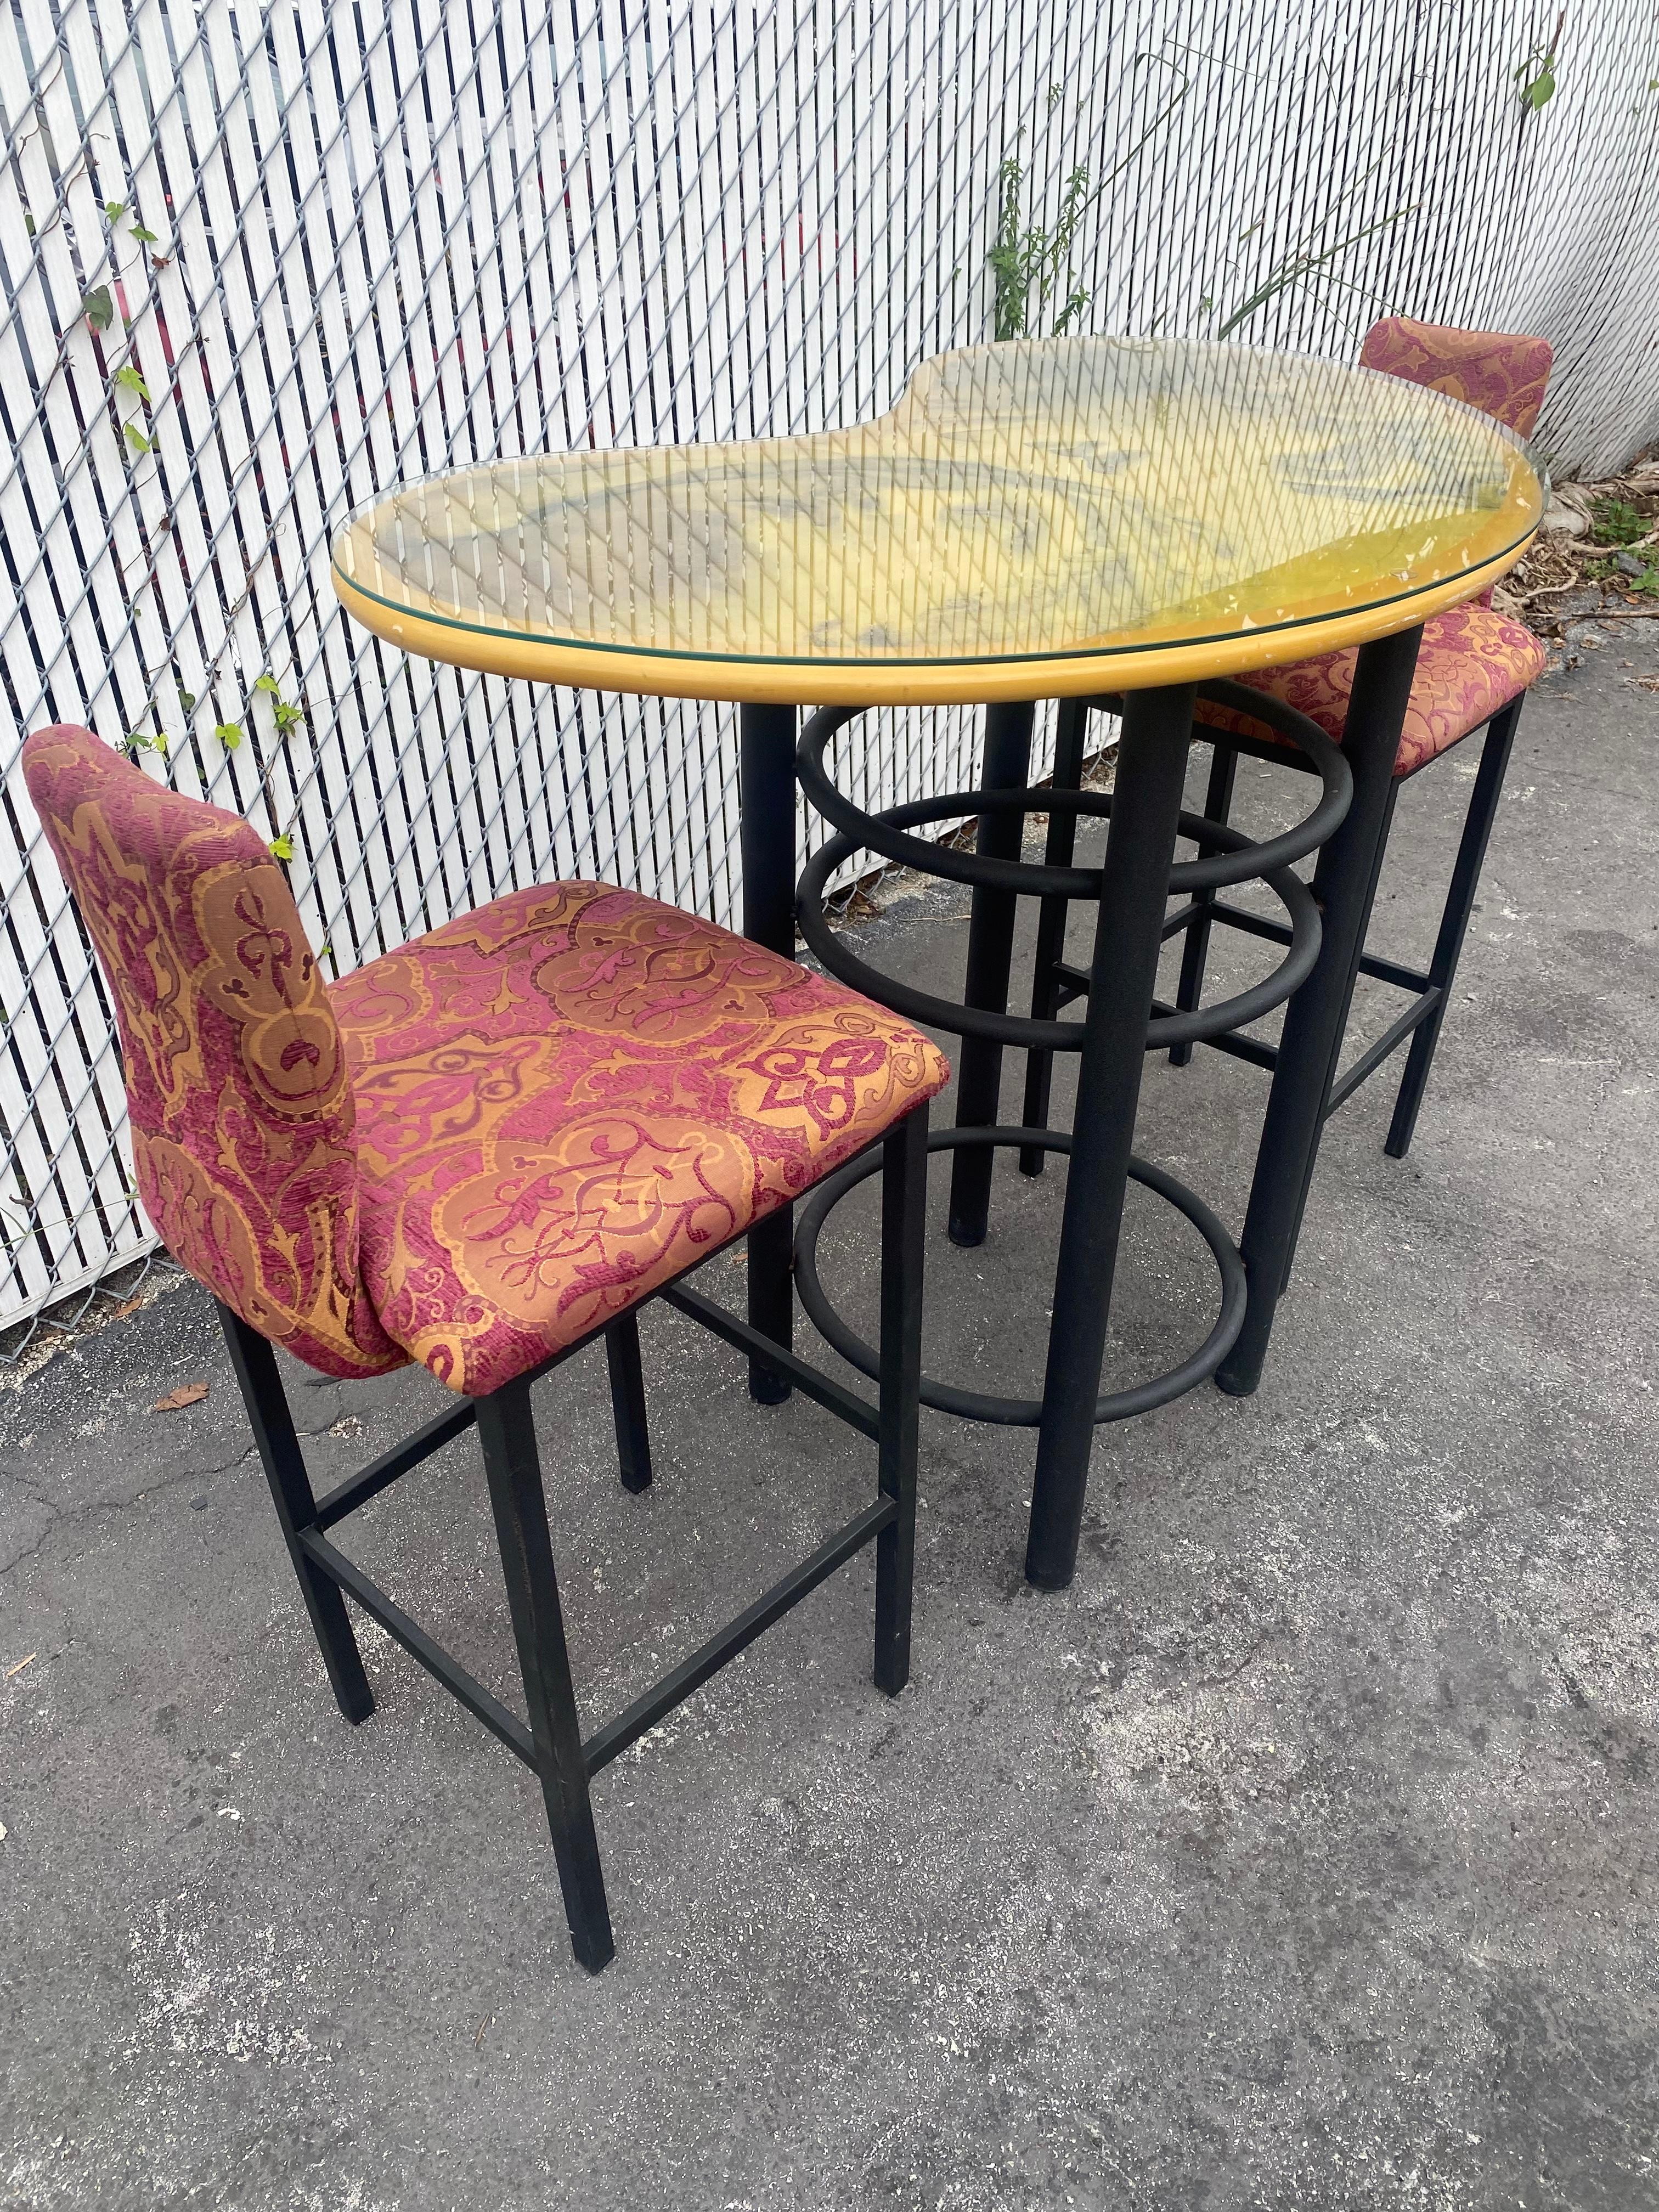 1980s Artistic Kidney Bar Pub Dining Table and Chairs, Set of 3 For Sale 1